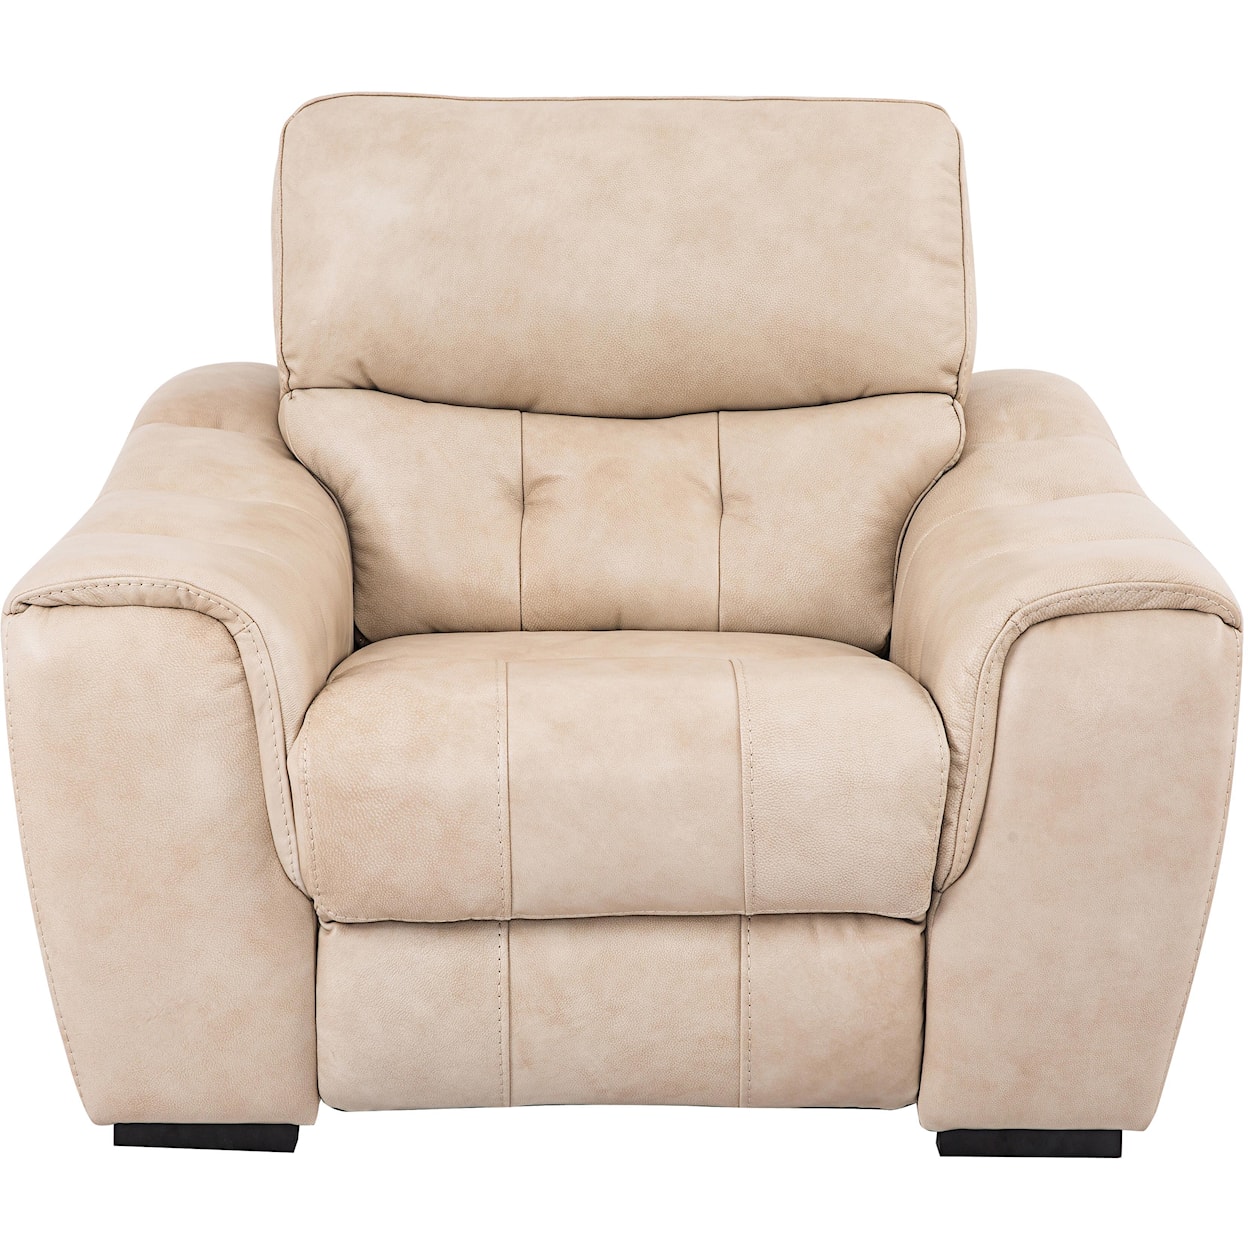 VFM Signature 1005 Casual Upholstered Chair